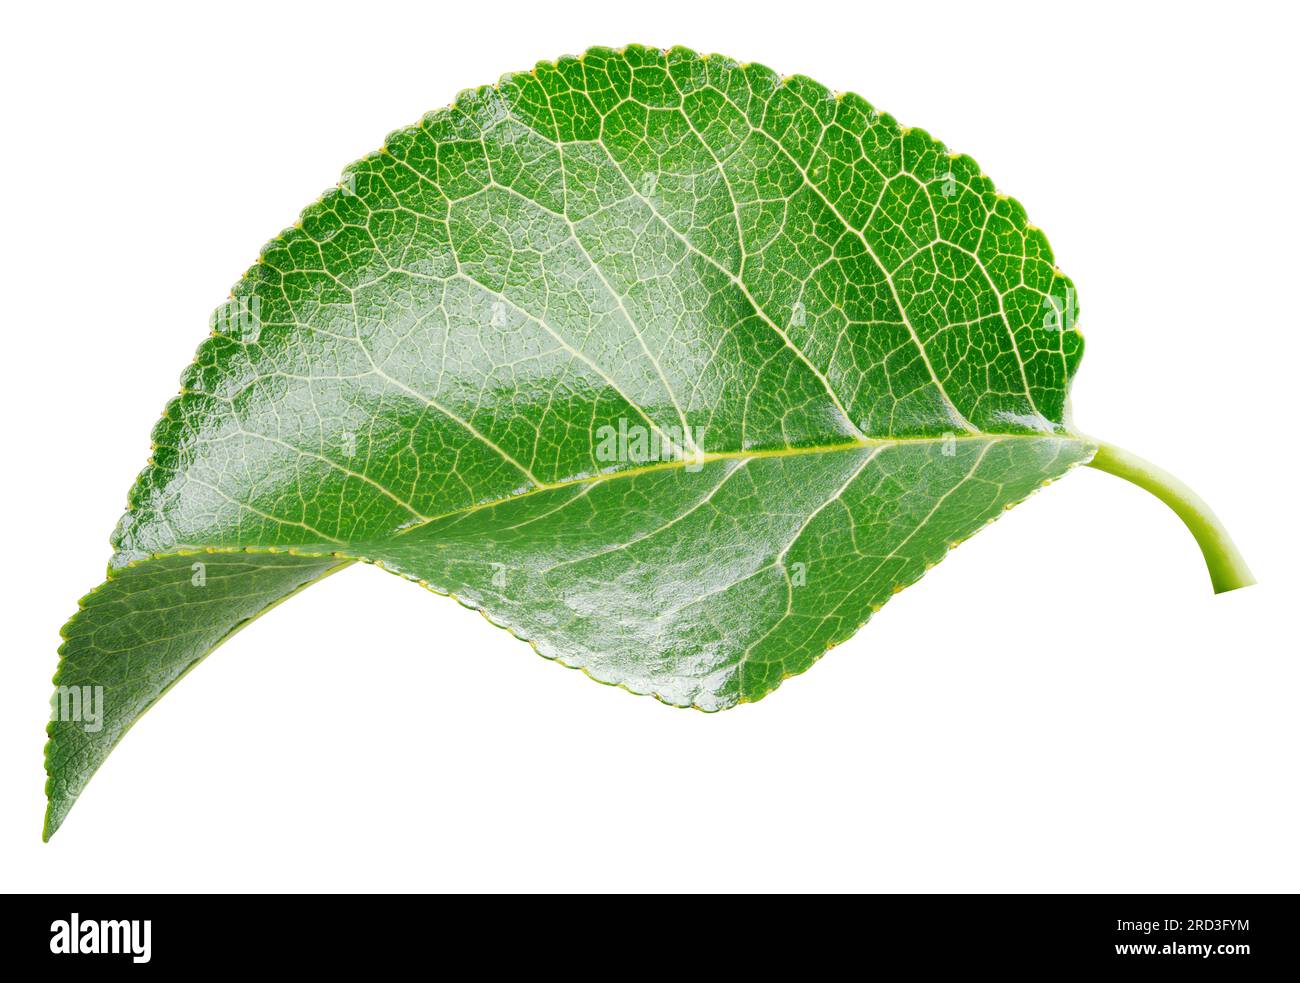 Apple leaf isolated on white background. Fruit green leaf with clipping path Stock Photo